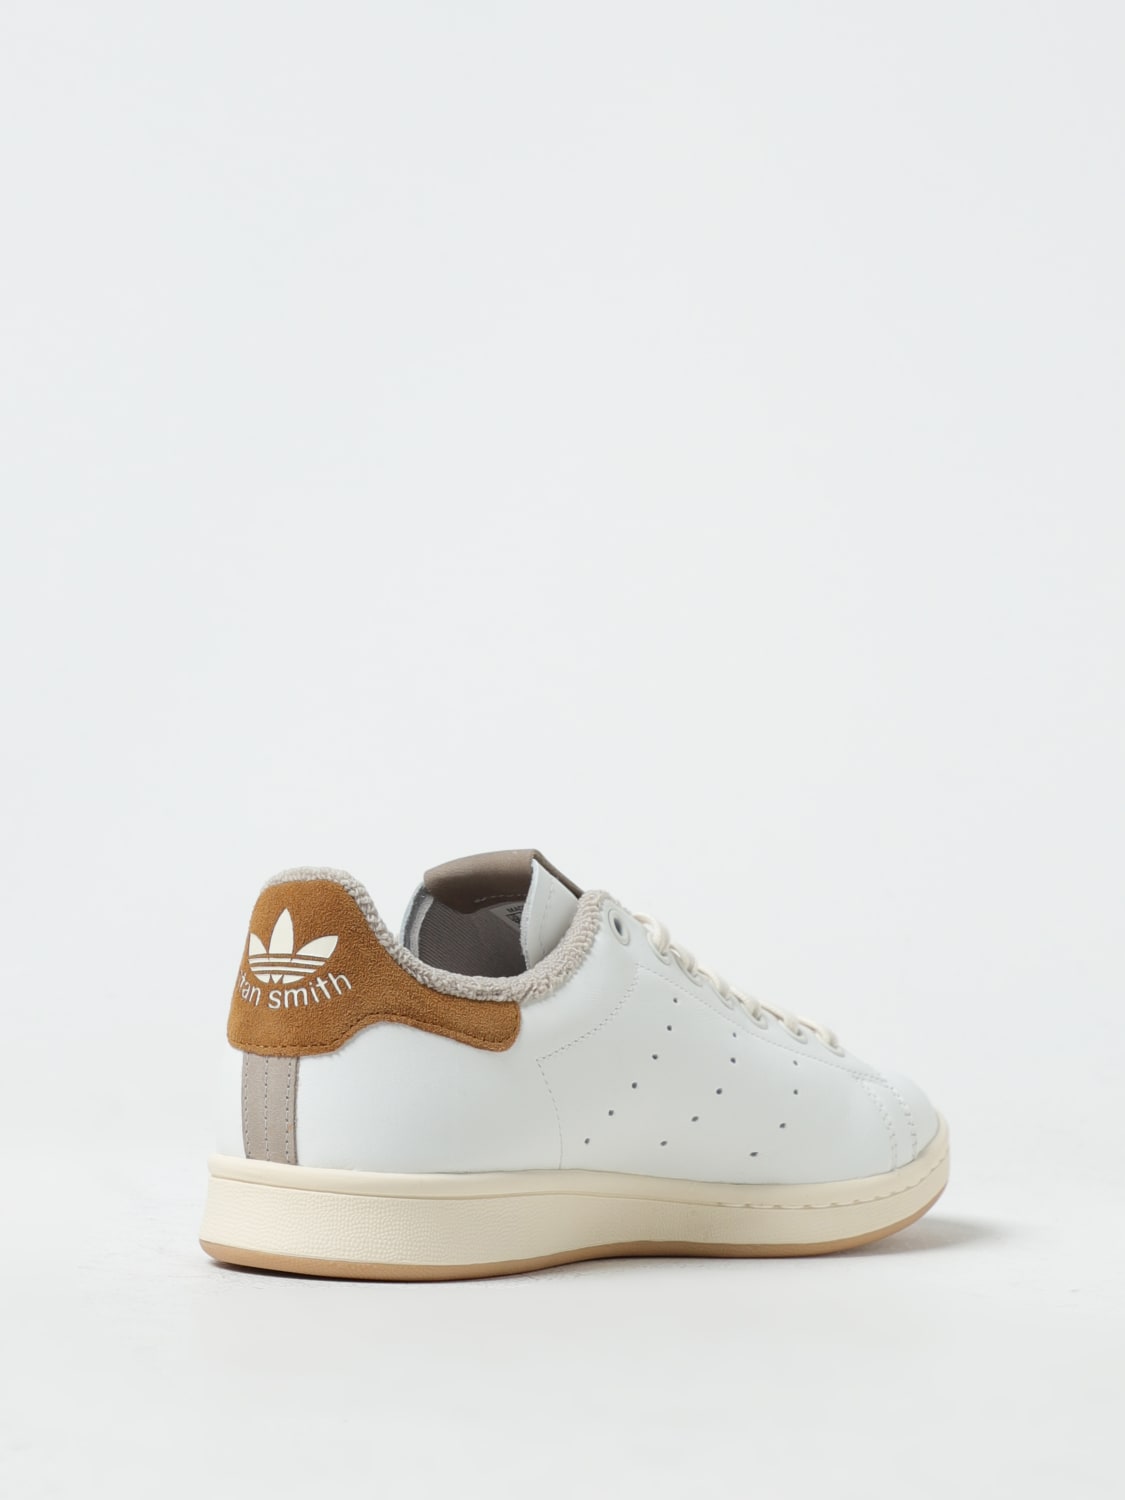 ADIDAS ORIGINALS: Stan White Adidas Smith leather sneakers | in sneakers ID2031 online - Originals at